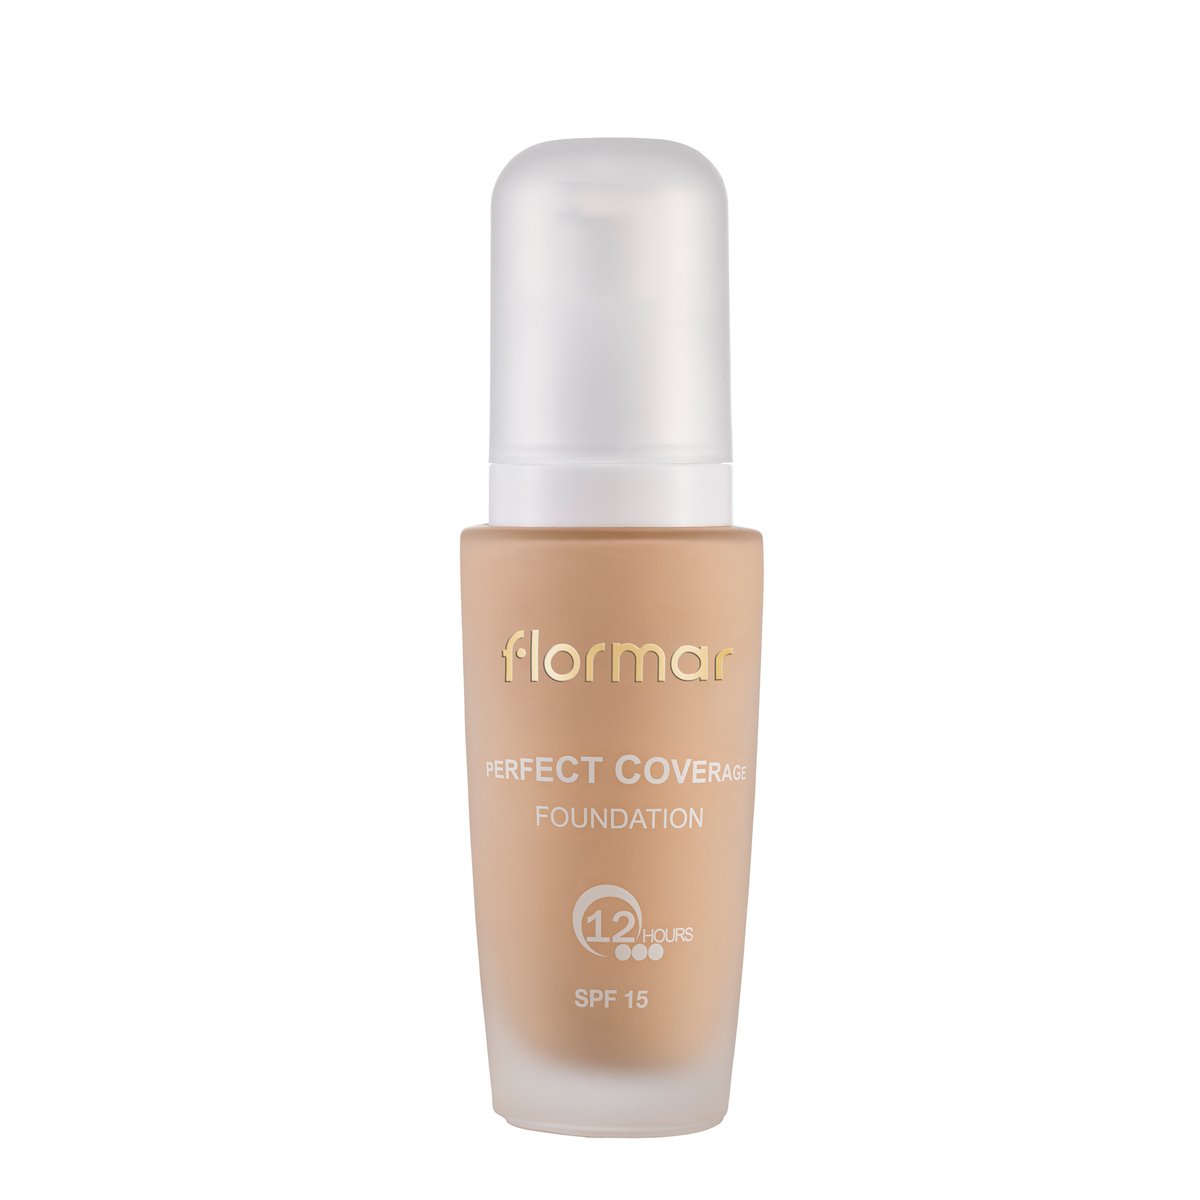 Flormar Perfect Coverage Foundation - 101 Pastelle 1pc